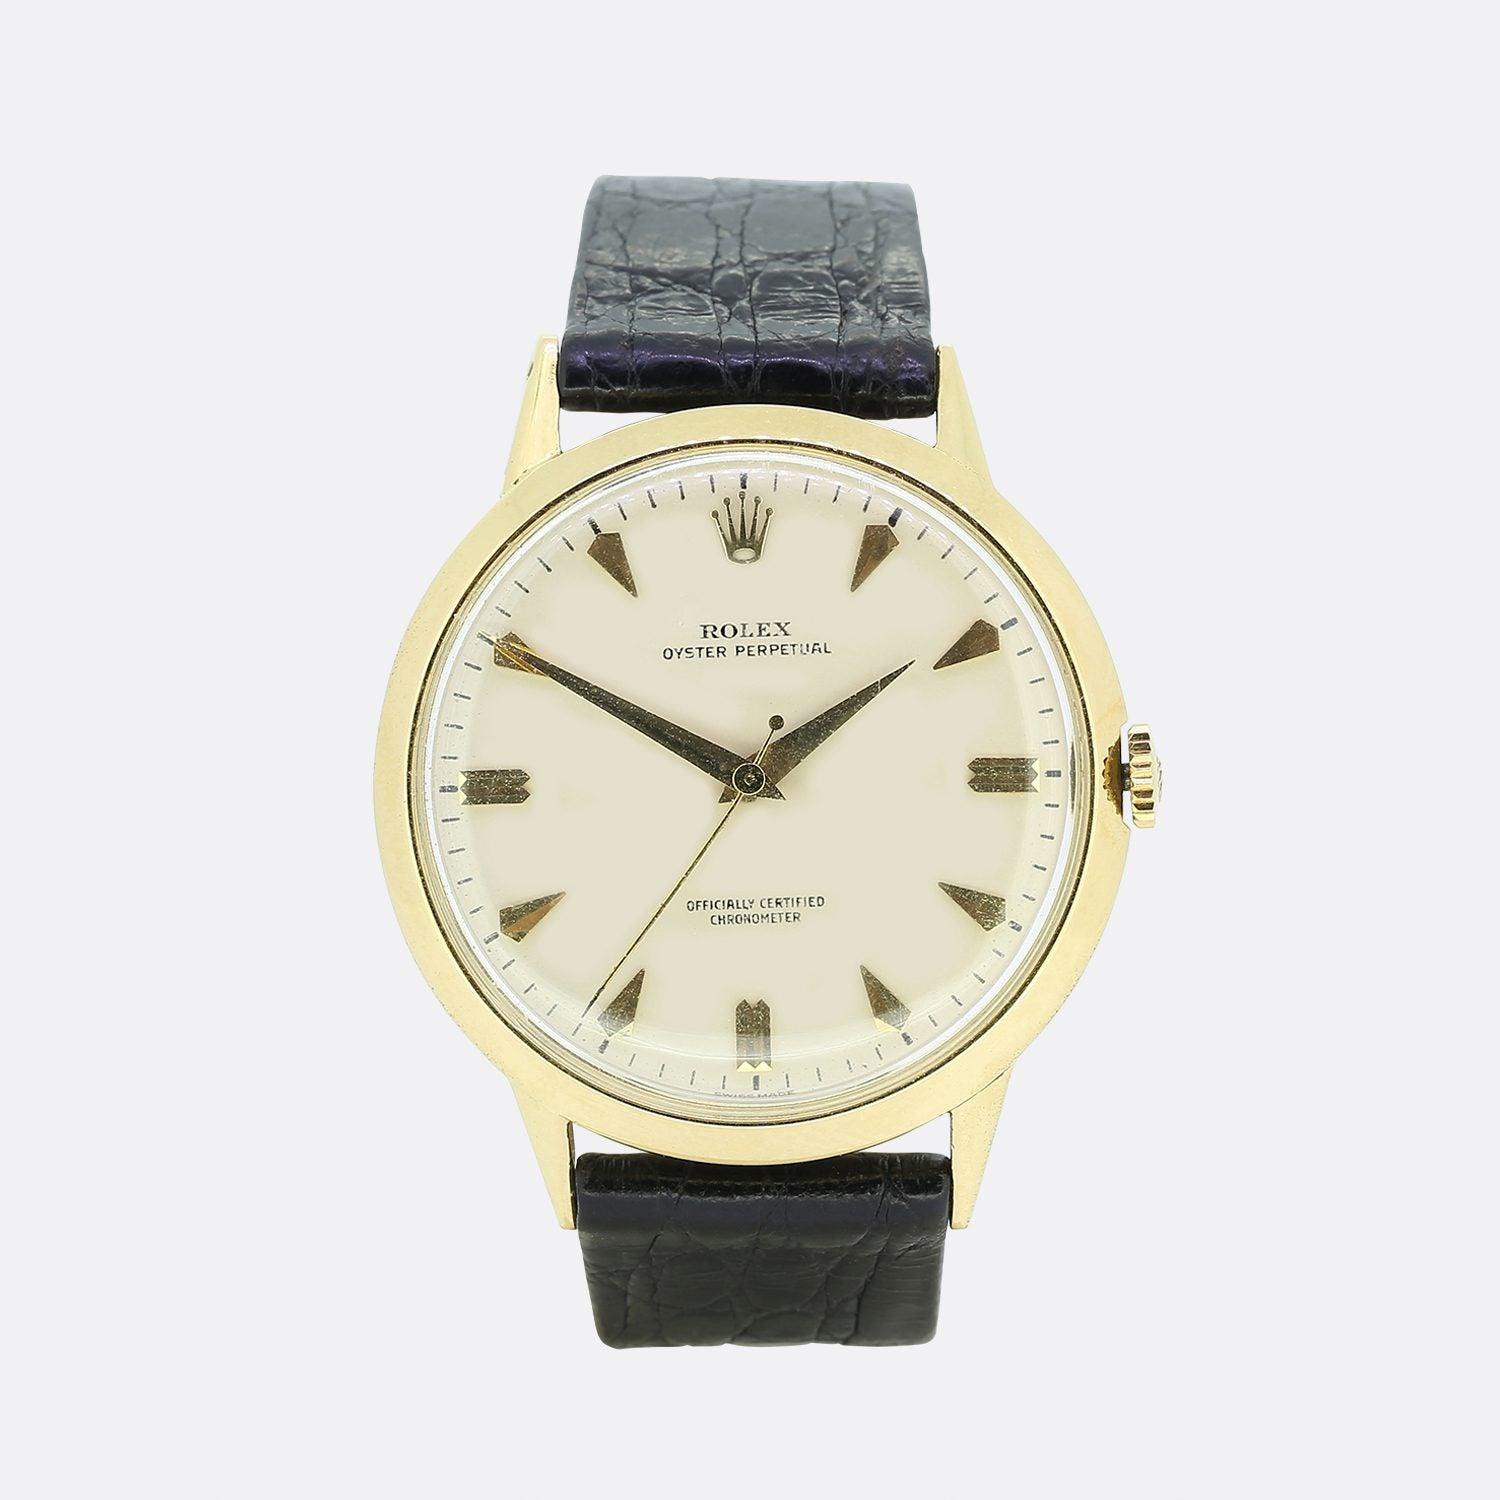 This is a Vintage 18ct yellow Rolex Oyster Perpetual watch. The watch has an 18ct yellow gold case, a cream dial with gold hour markers and the Rolex crown at 12 o'clock. The watch features all its original parts and the Rolex logo can be seen on